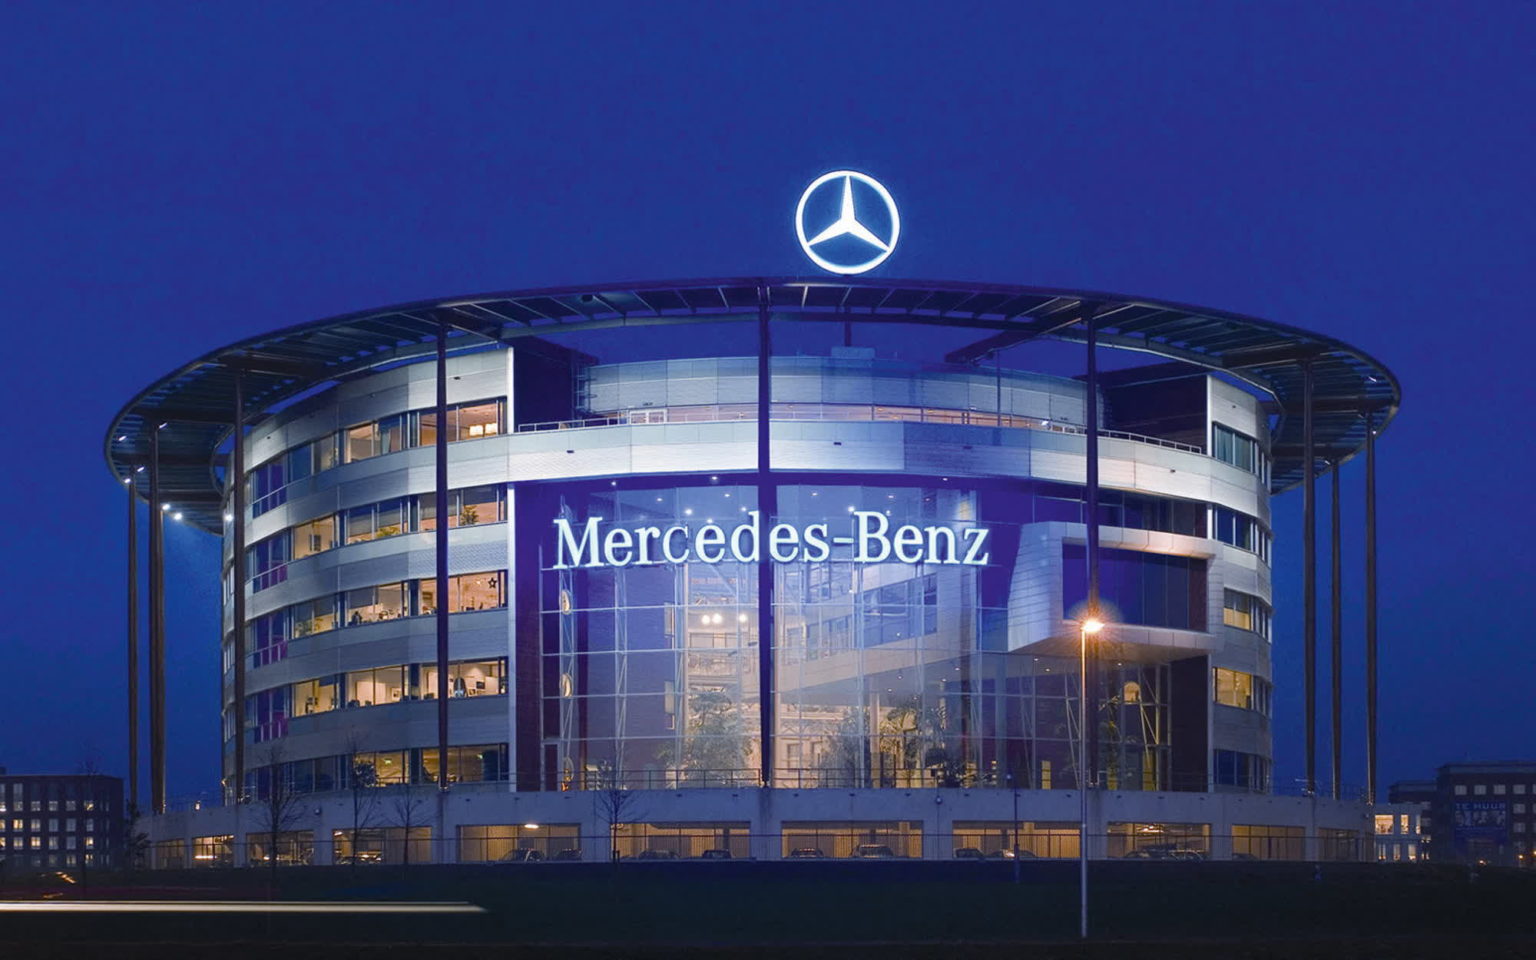 Mercedes-Benz accidentally shared its source code and business secrets with the whole world